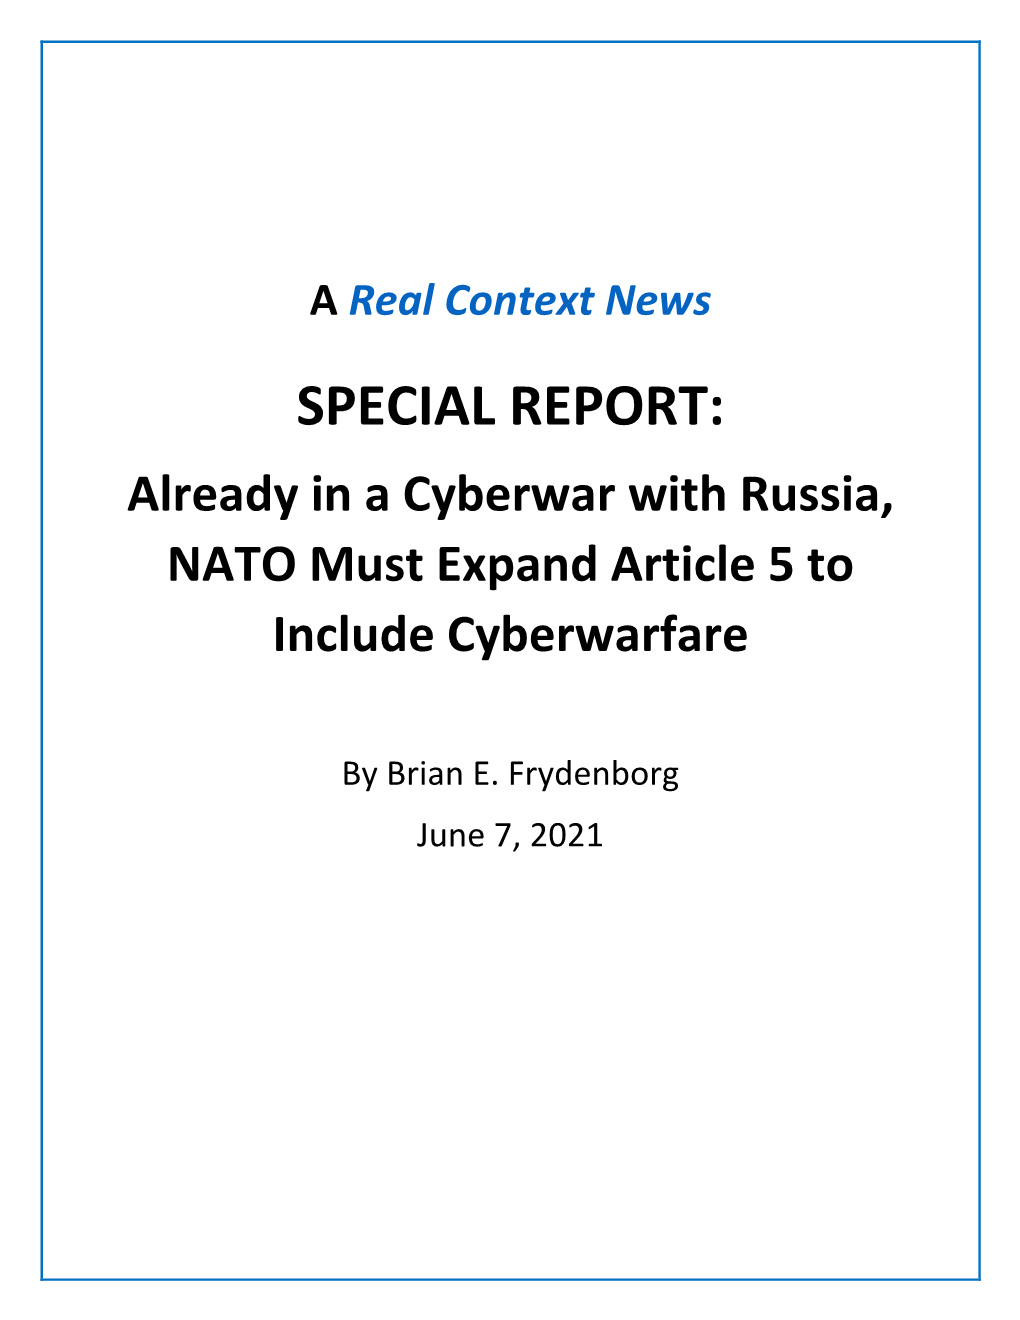 SPECIAL REPORT: Already in a Cyberwar with Russia, NATO Must Expand Article 5 to Include Cyberwarfare